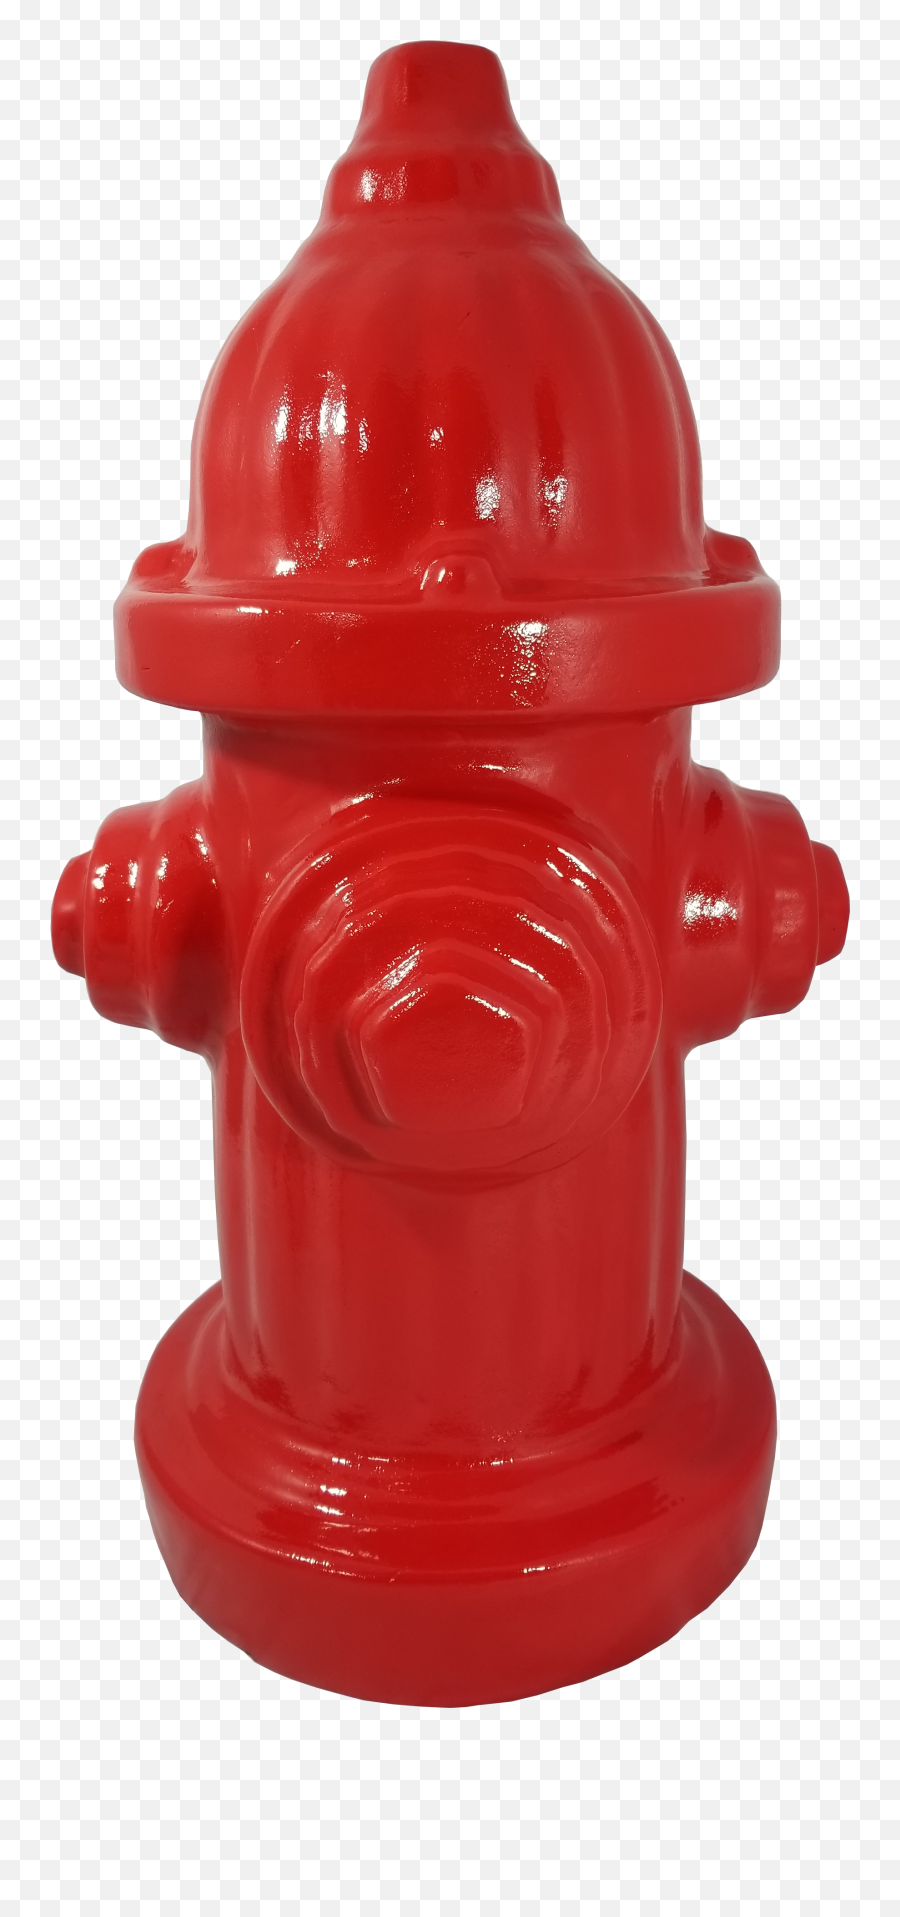 Fire Hydrant Png - Hydrant Pngimg Emoji,Fire Hydrant Clipart